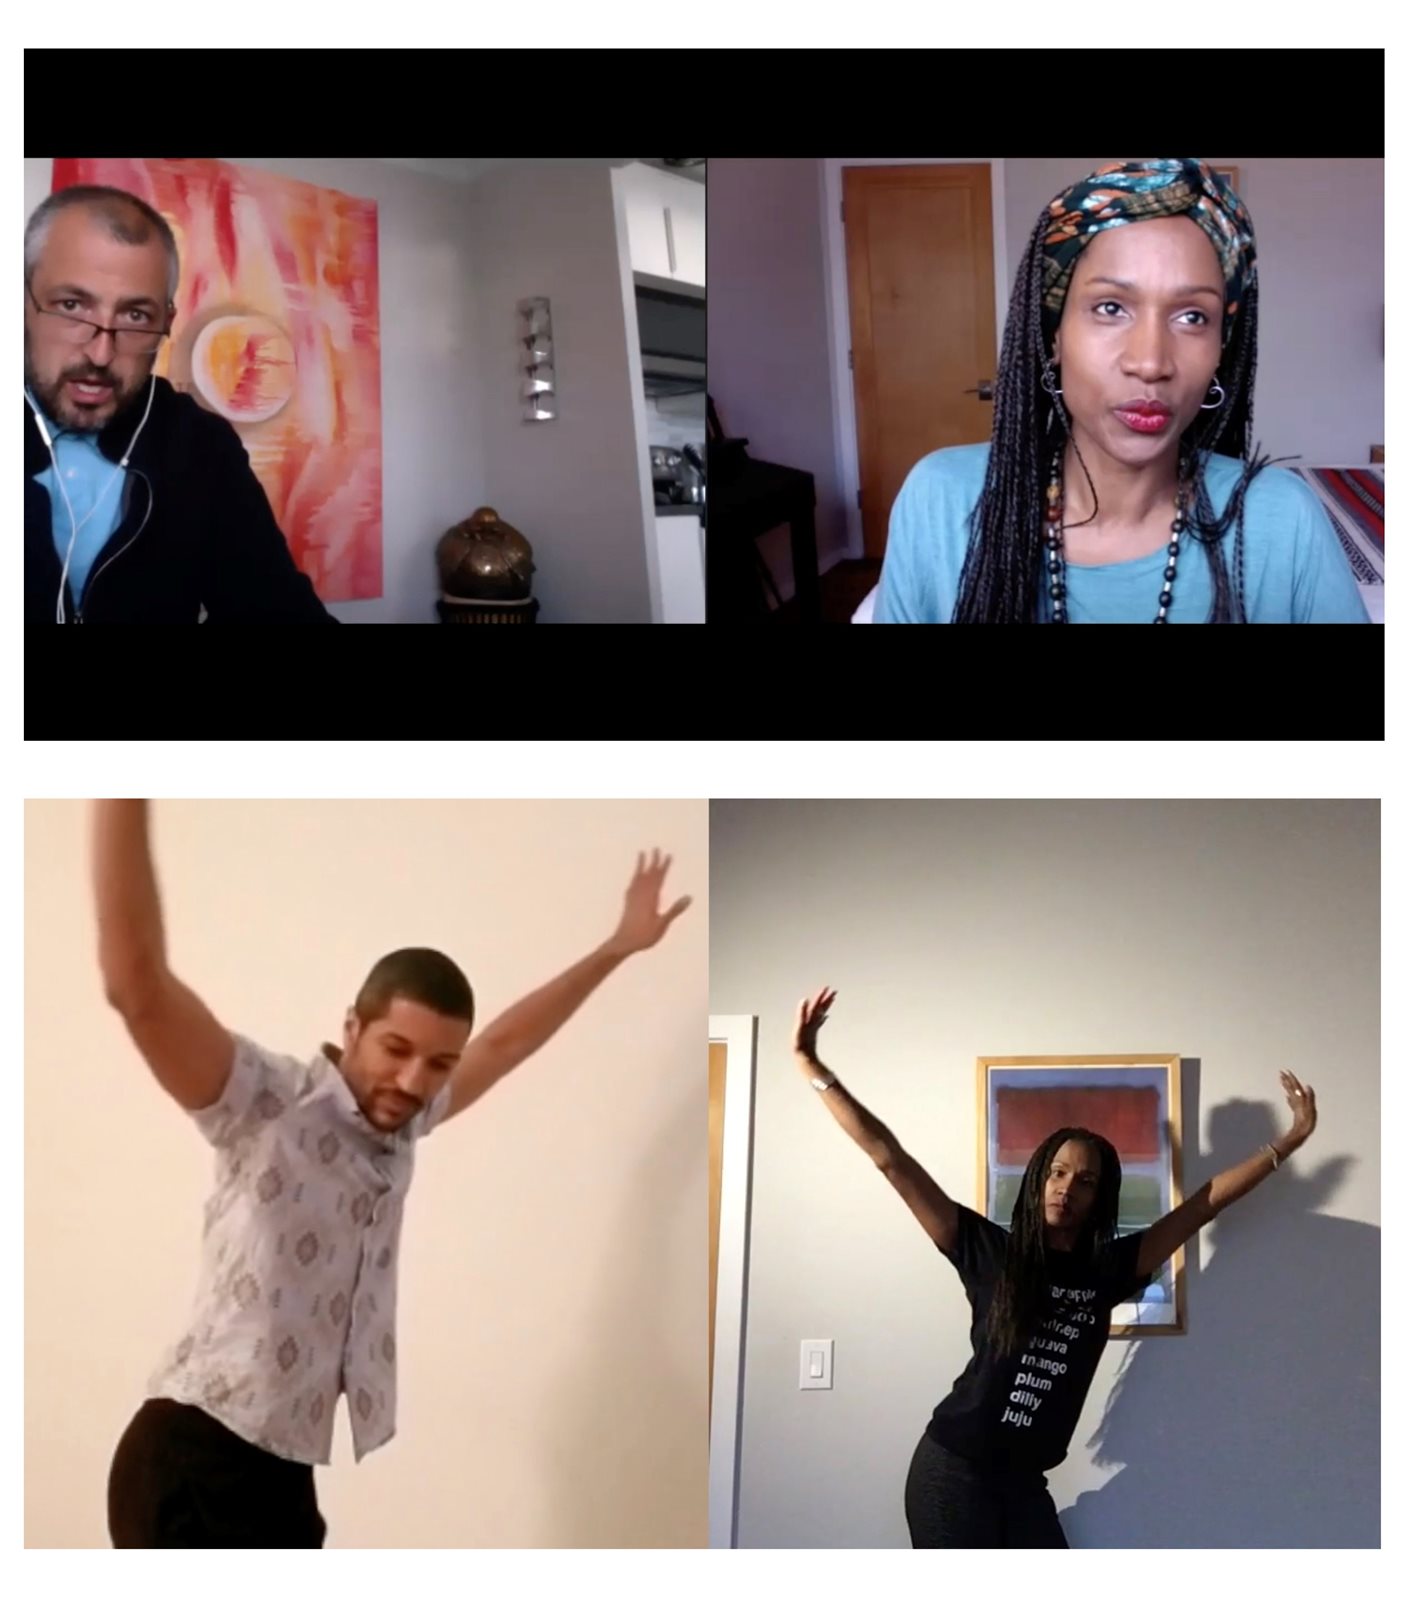 Performing Memory for Black (re)Cognition (video still) | Performers: Justin C. Lynch, Berette S Macaulay, Mark S. Pergola